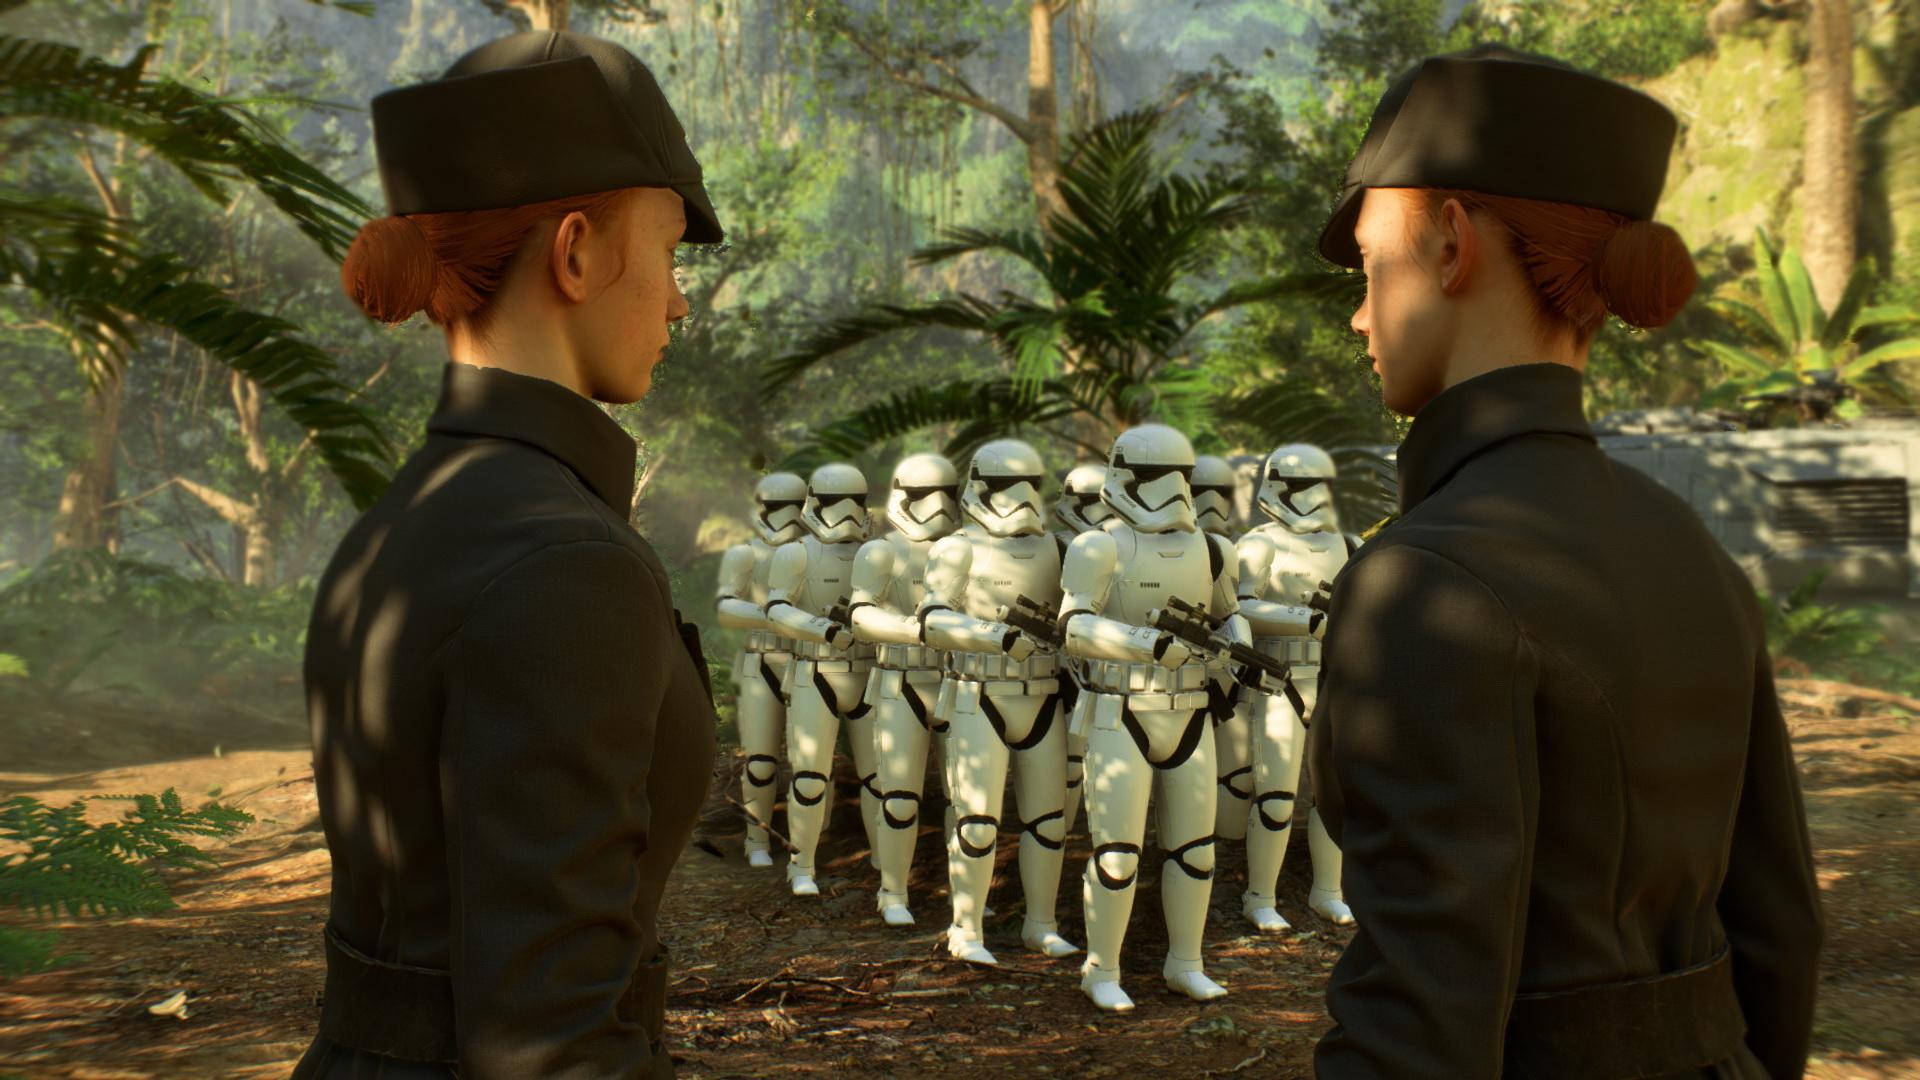 Looks like First Order is back to cloning! I think there should be